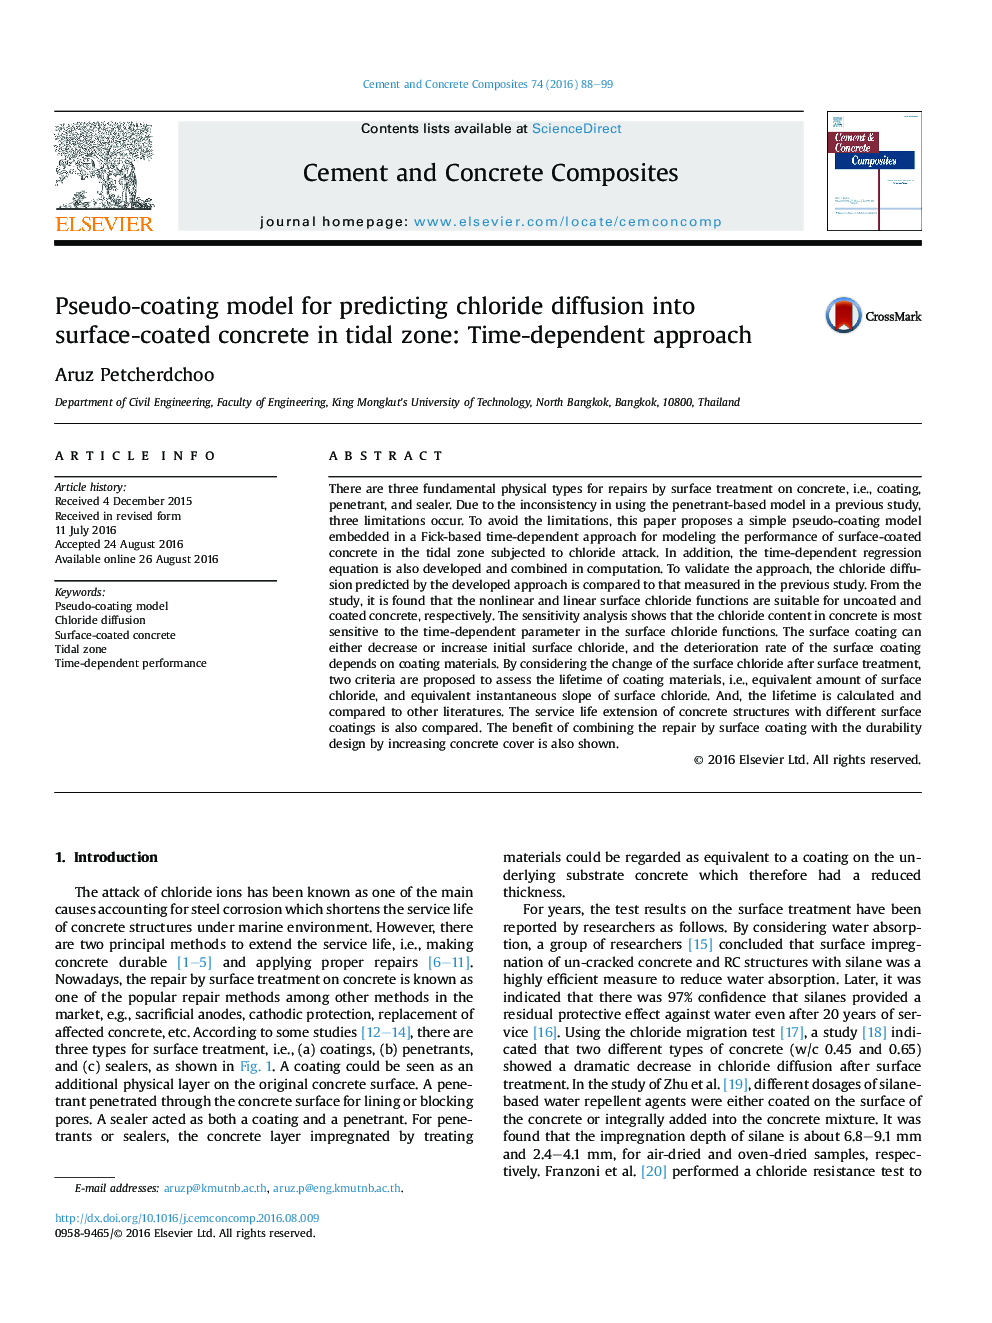 Pseudo-coating model for predicting chloride diffusion into surface-coated concrete in tidal zone: Time-dependent approach